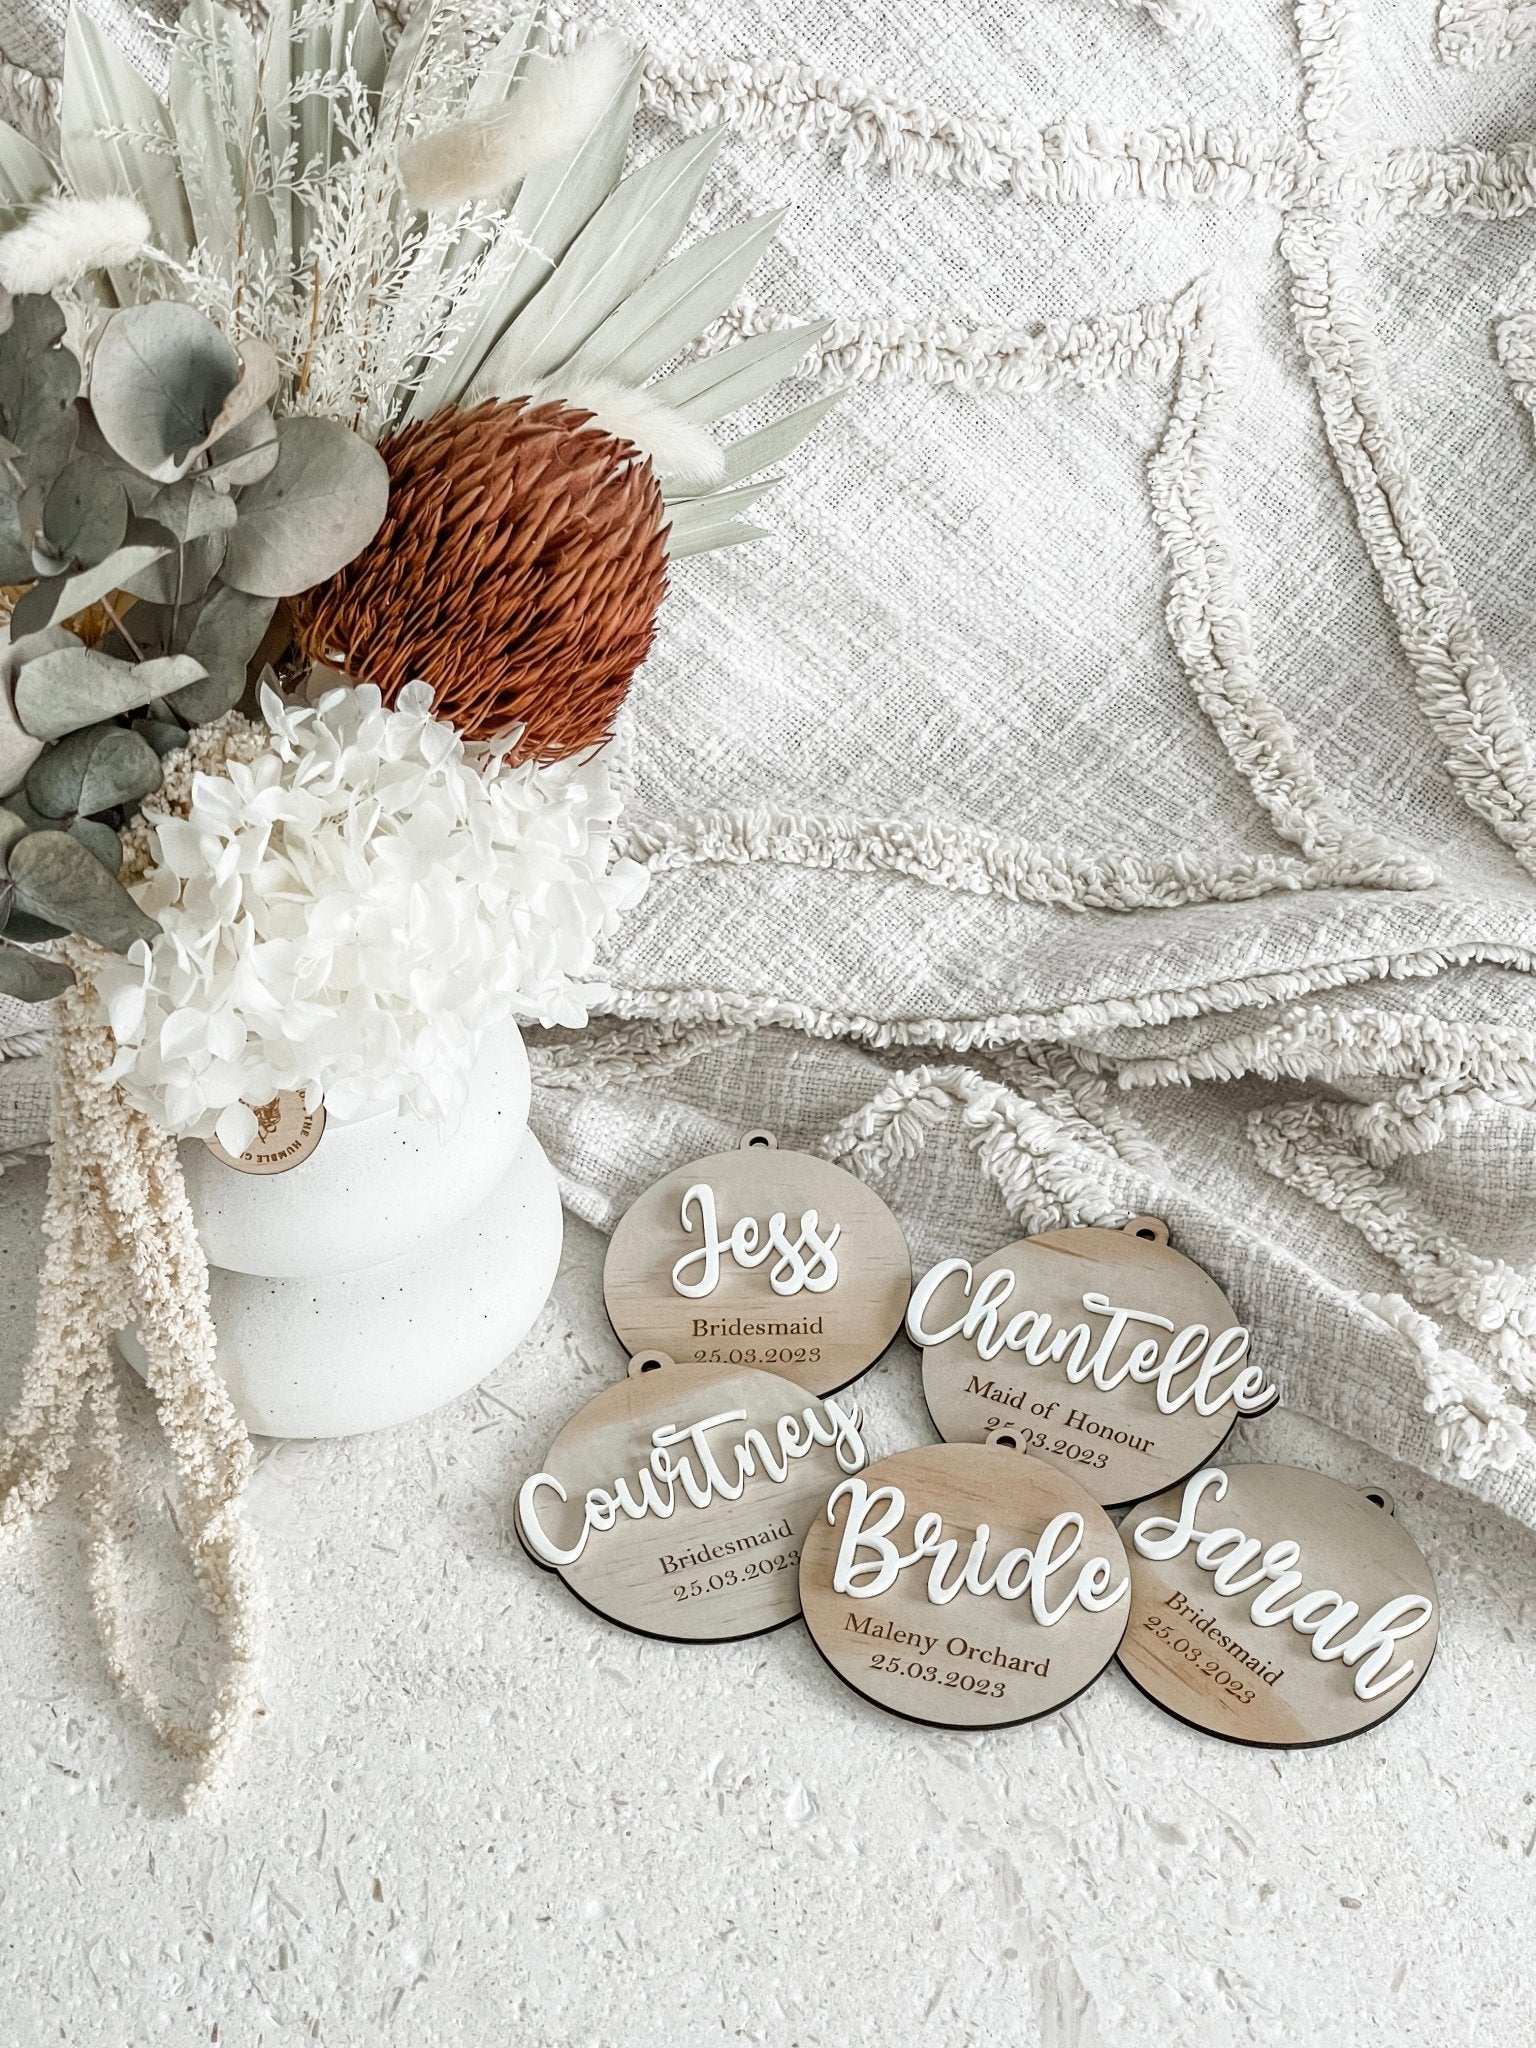 Personalised Event Bauble - The Humble Gift Co.